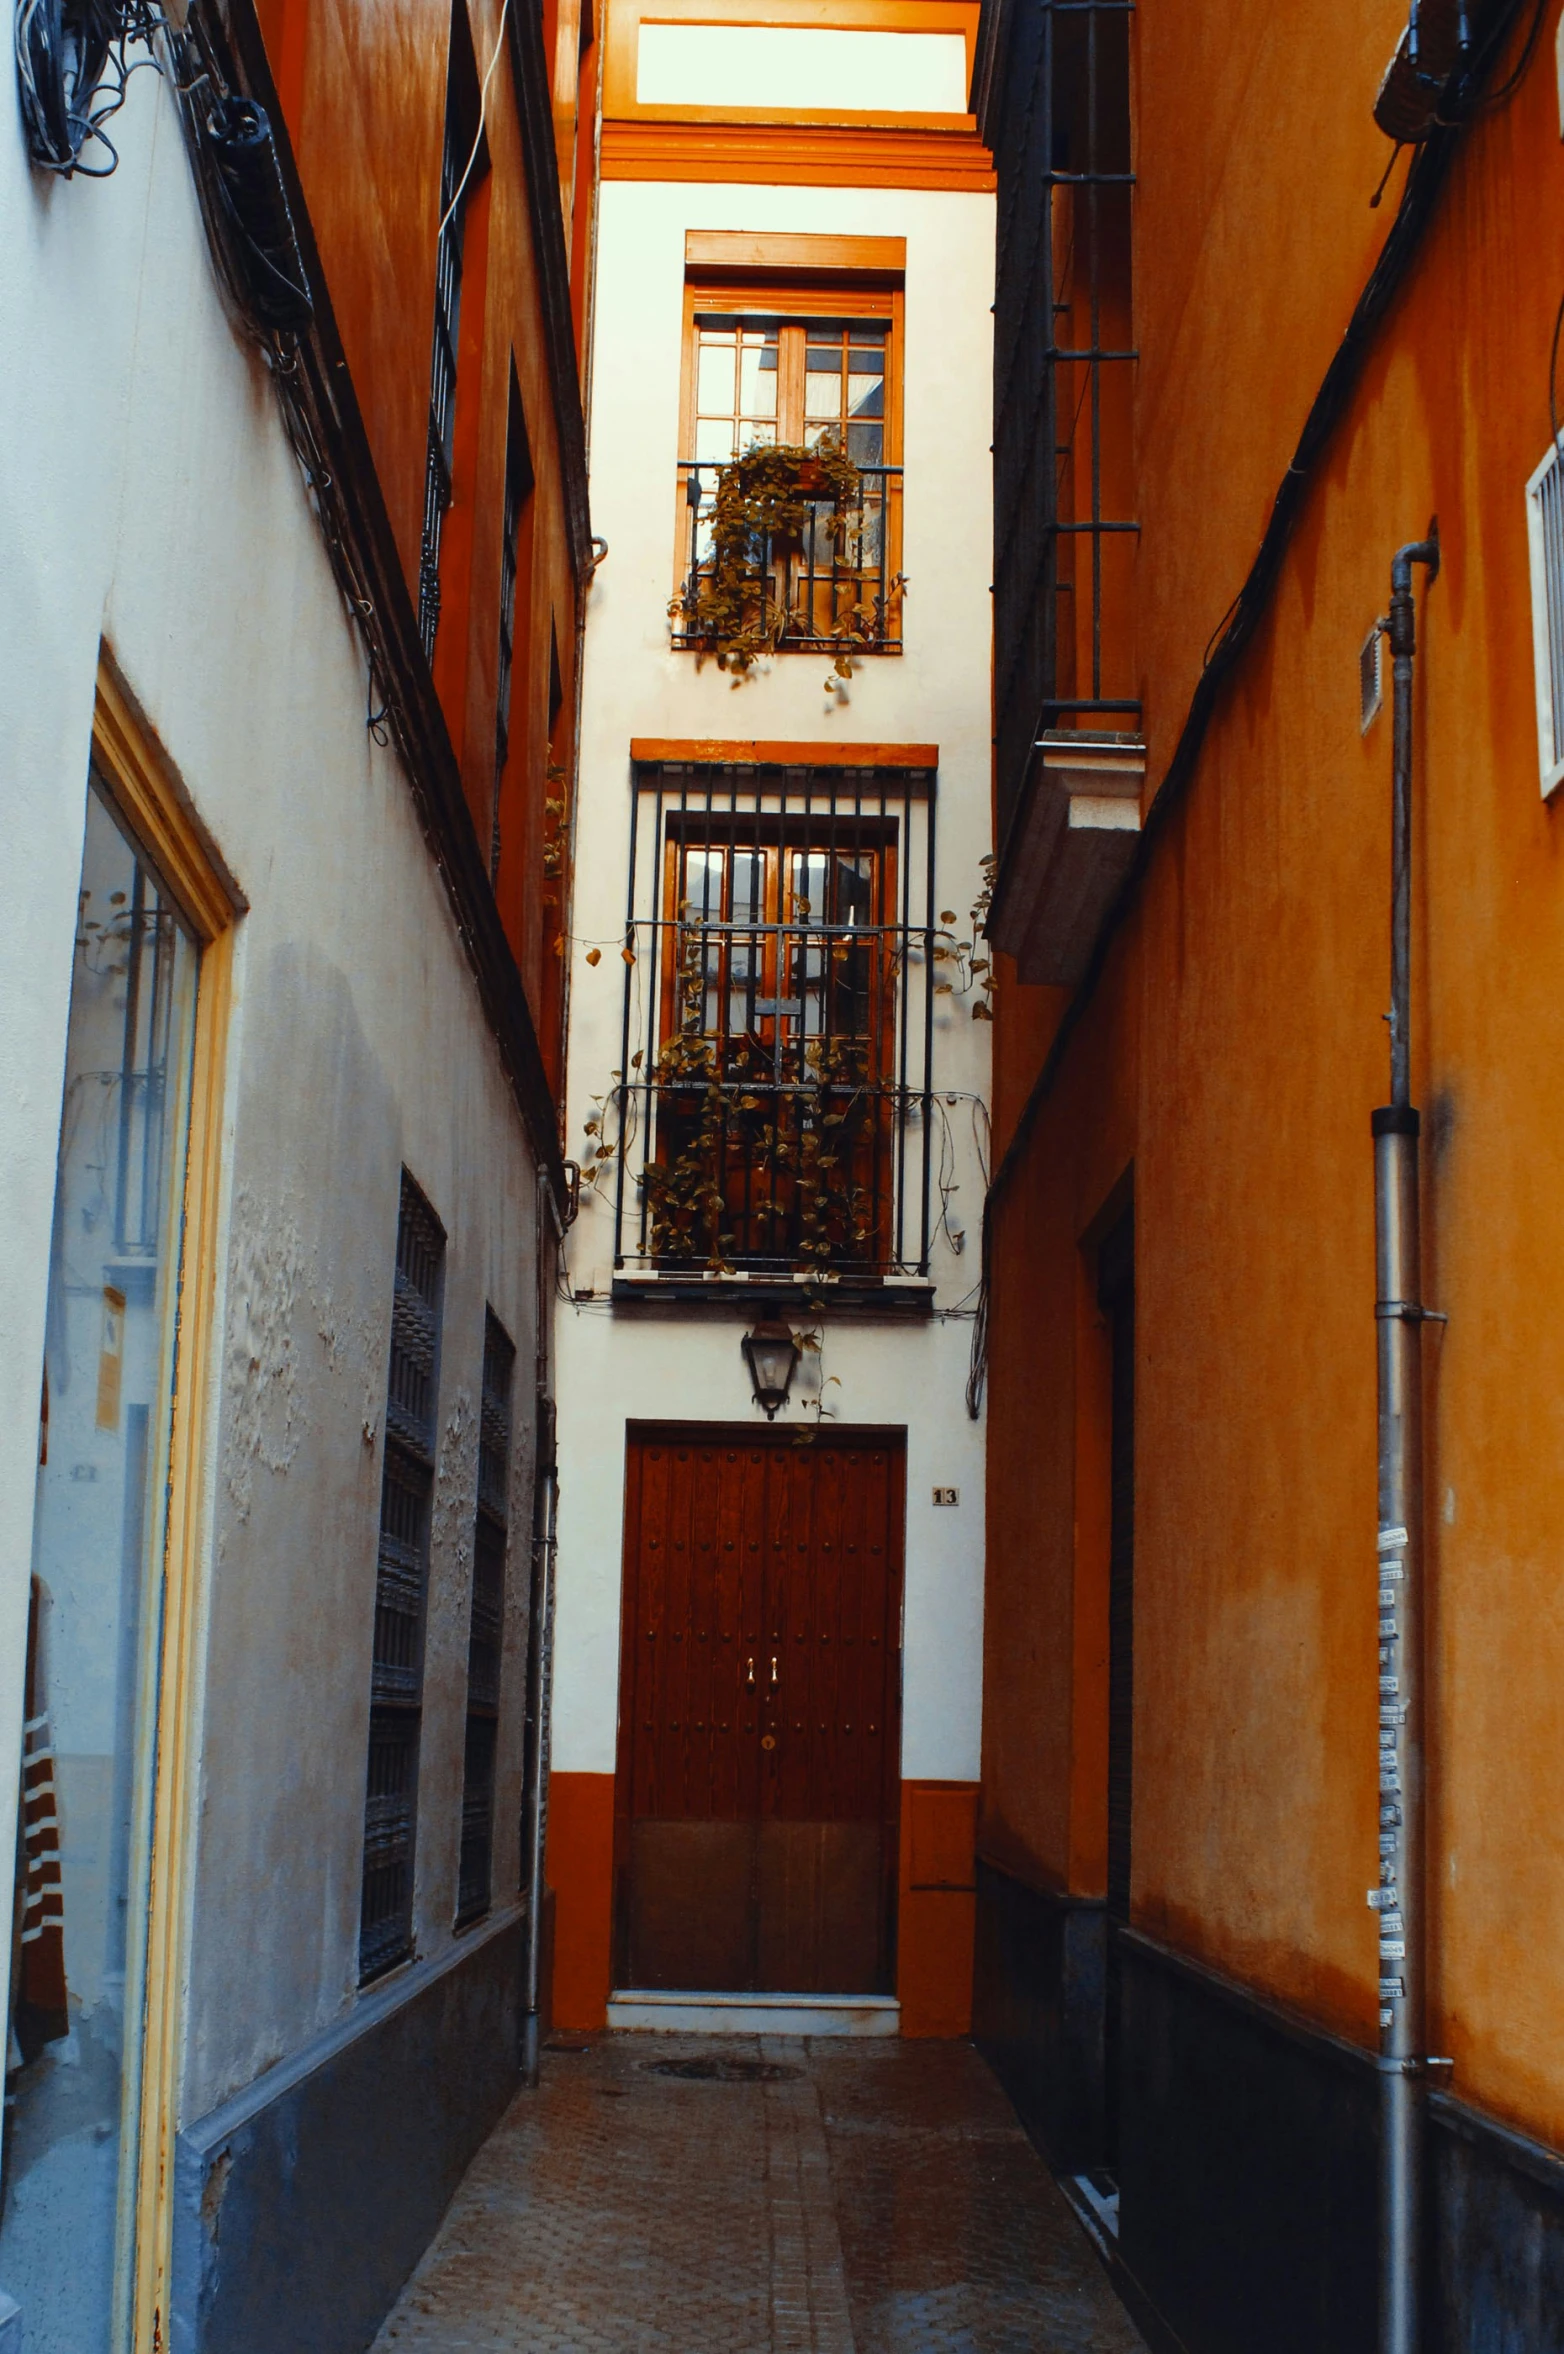 this narrow alley way has an iron door and window on either side